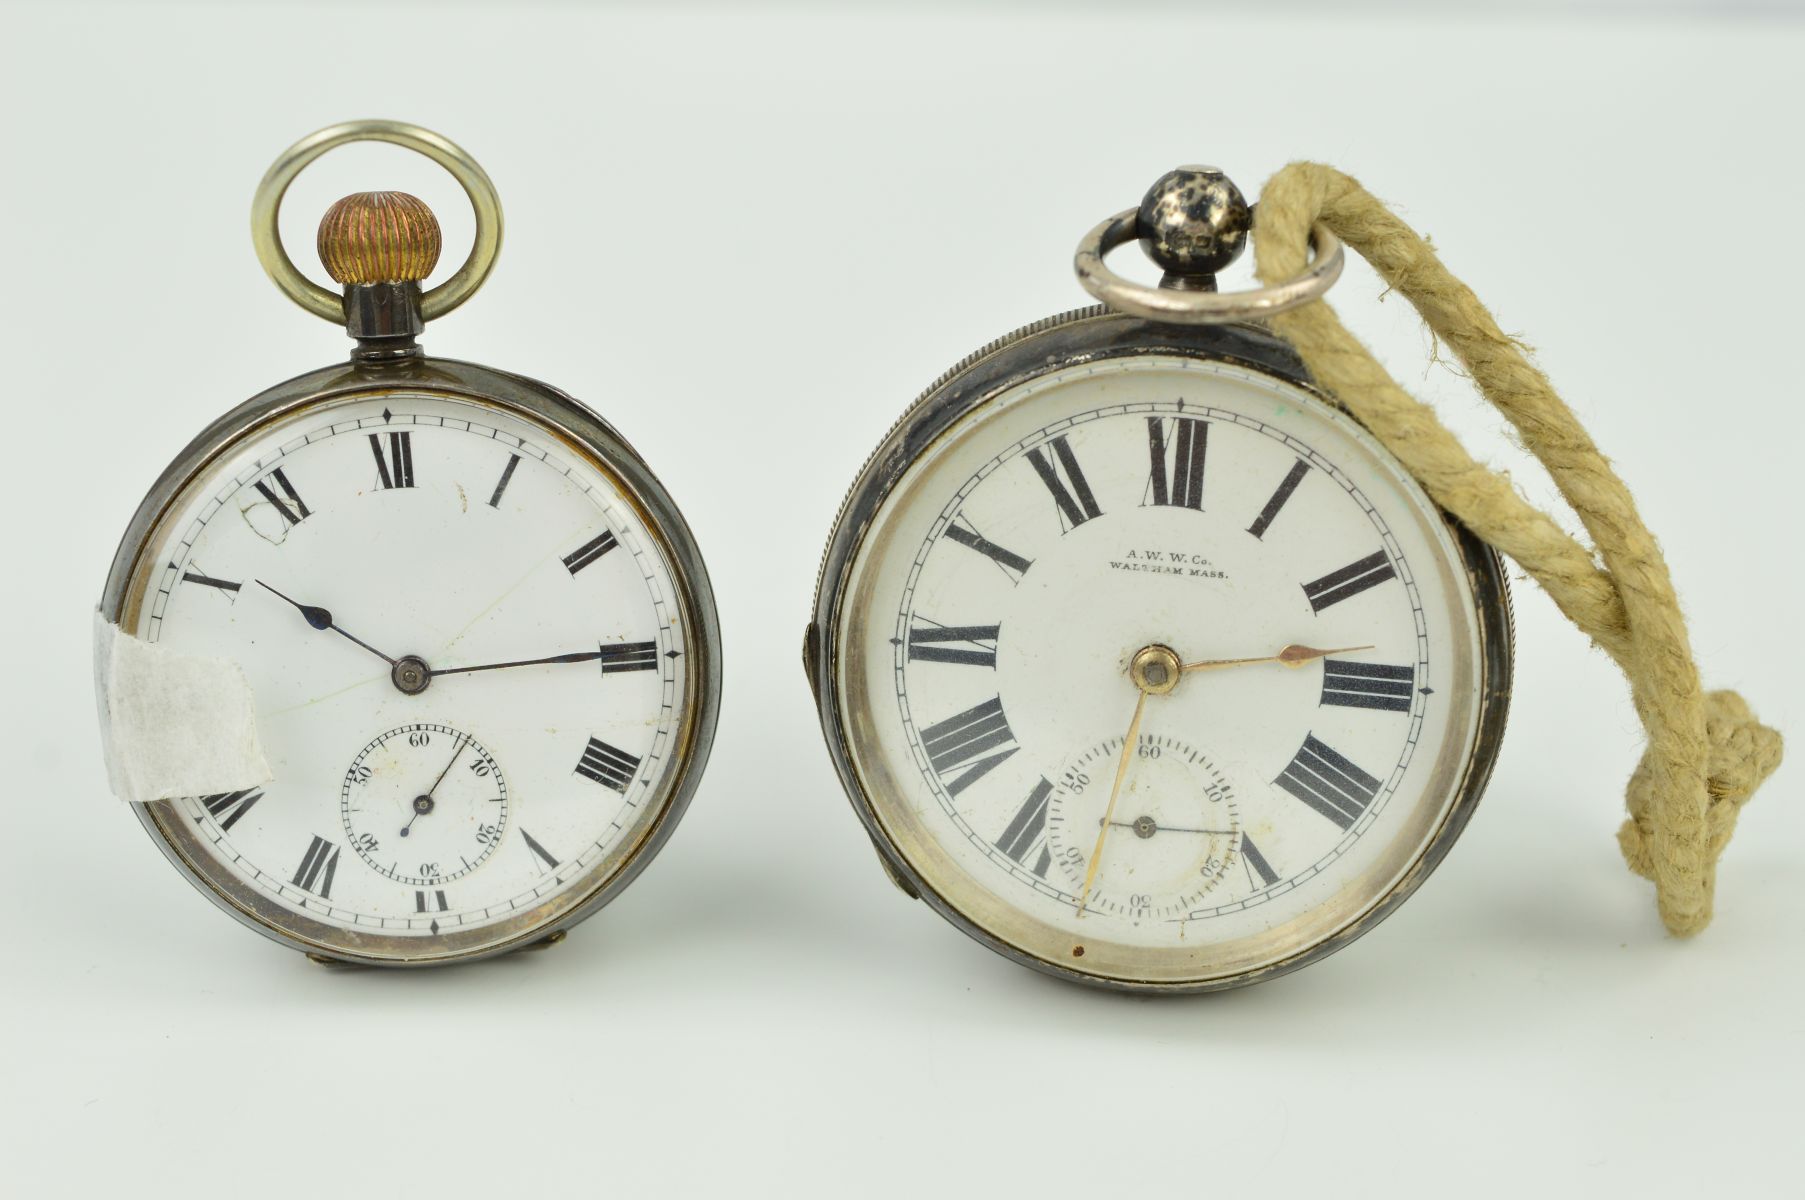 TWO EARLY 20TH CENTURY SILVER POCKET WATCHES, both open face pocket watches with white dials,